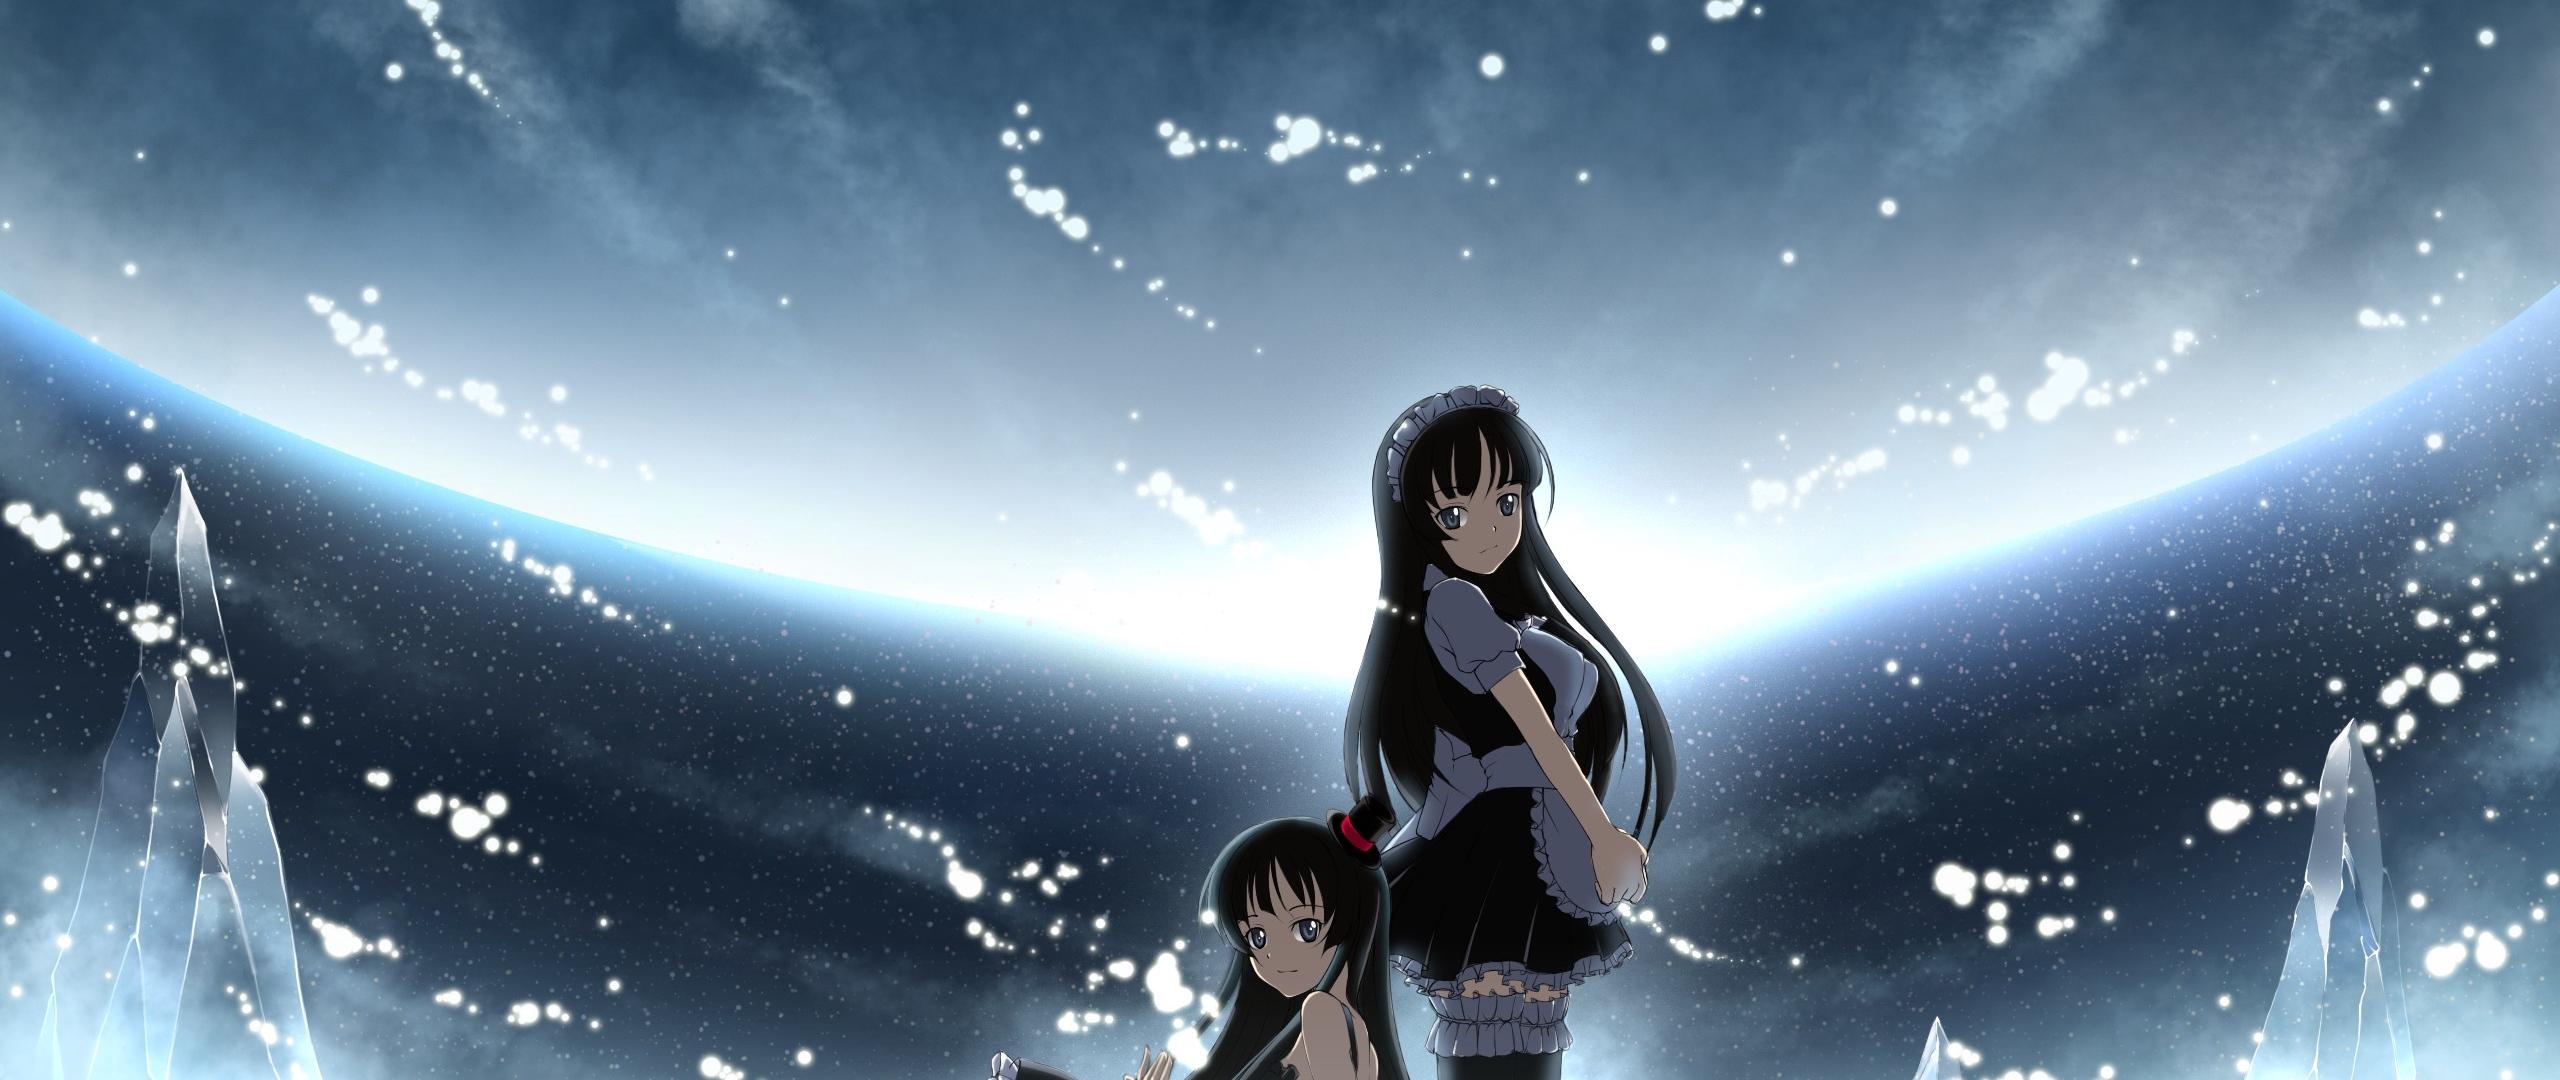 Download wallpaper 2560x1080 anime, brunette, ice, snow, space